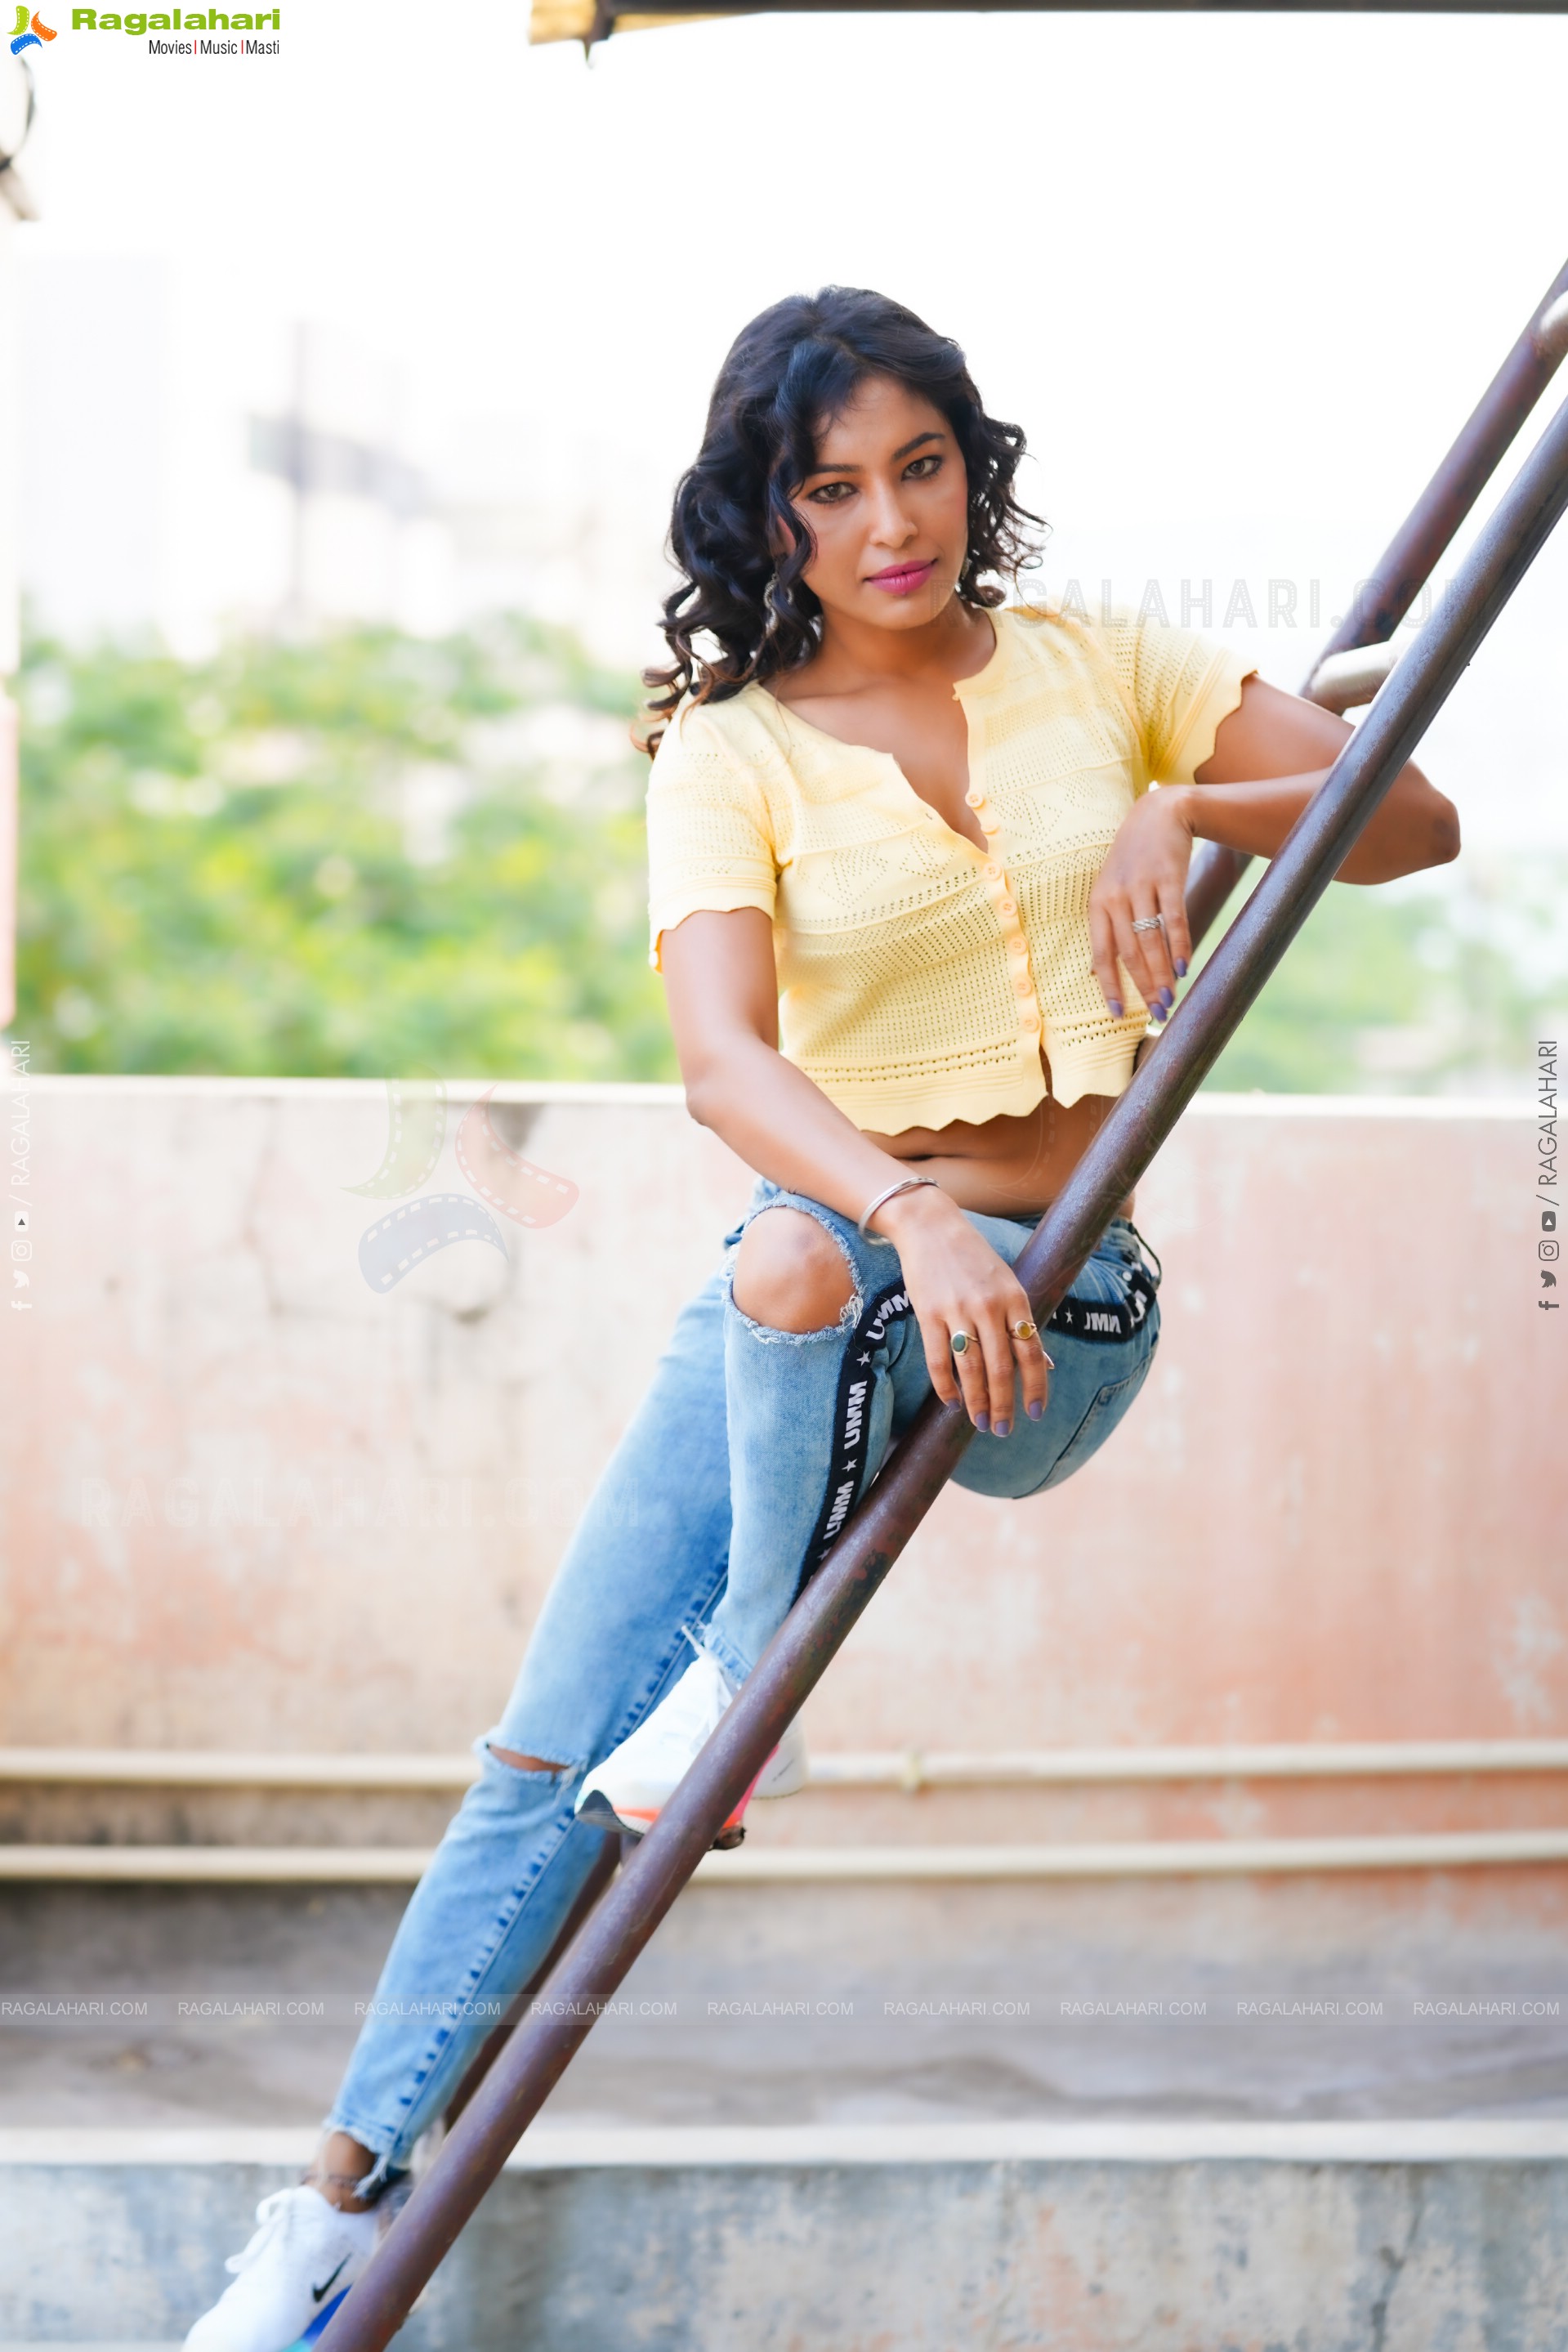 Ankita Bhattacharya in Yellow Crop Top and Jeans Pant, Exclusive Photoshoot